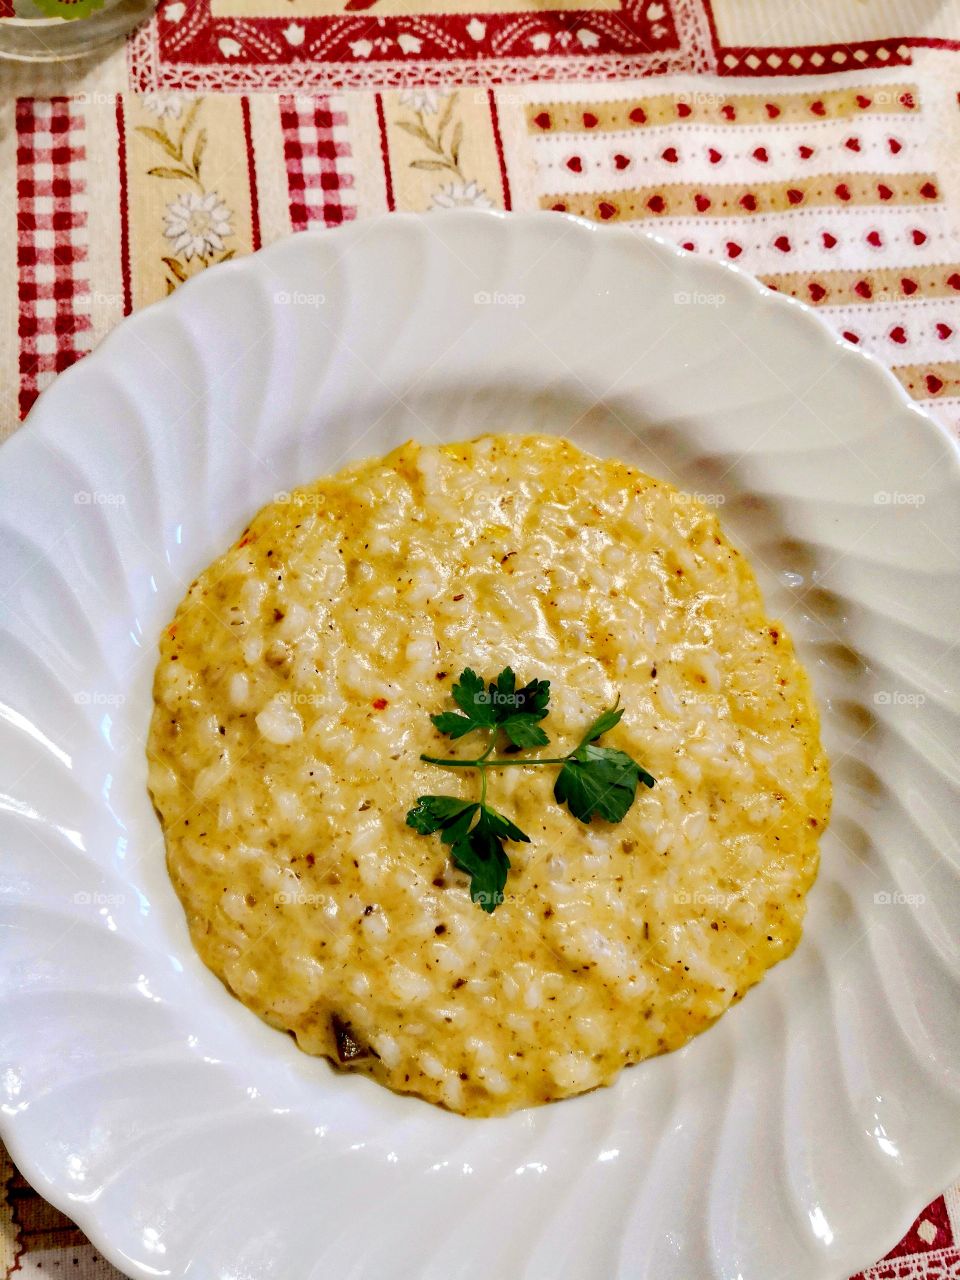 Risotto with mushrooms and saffron